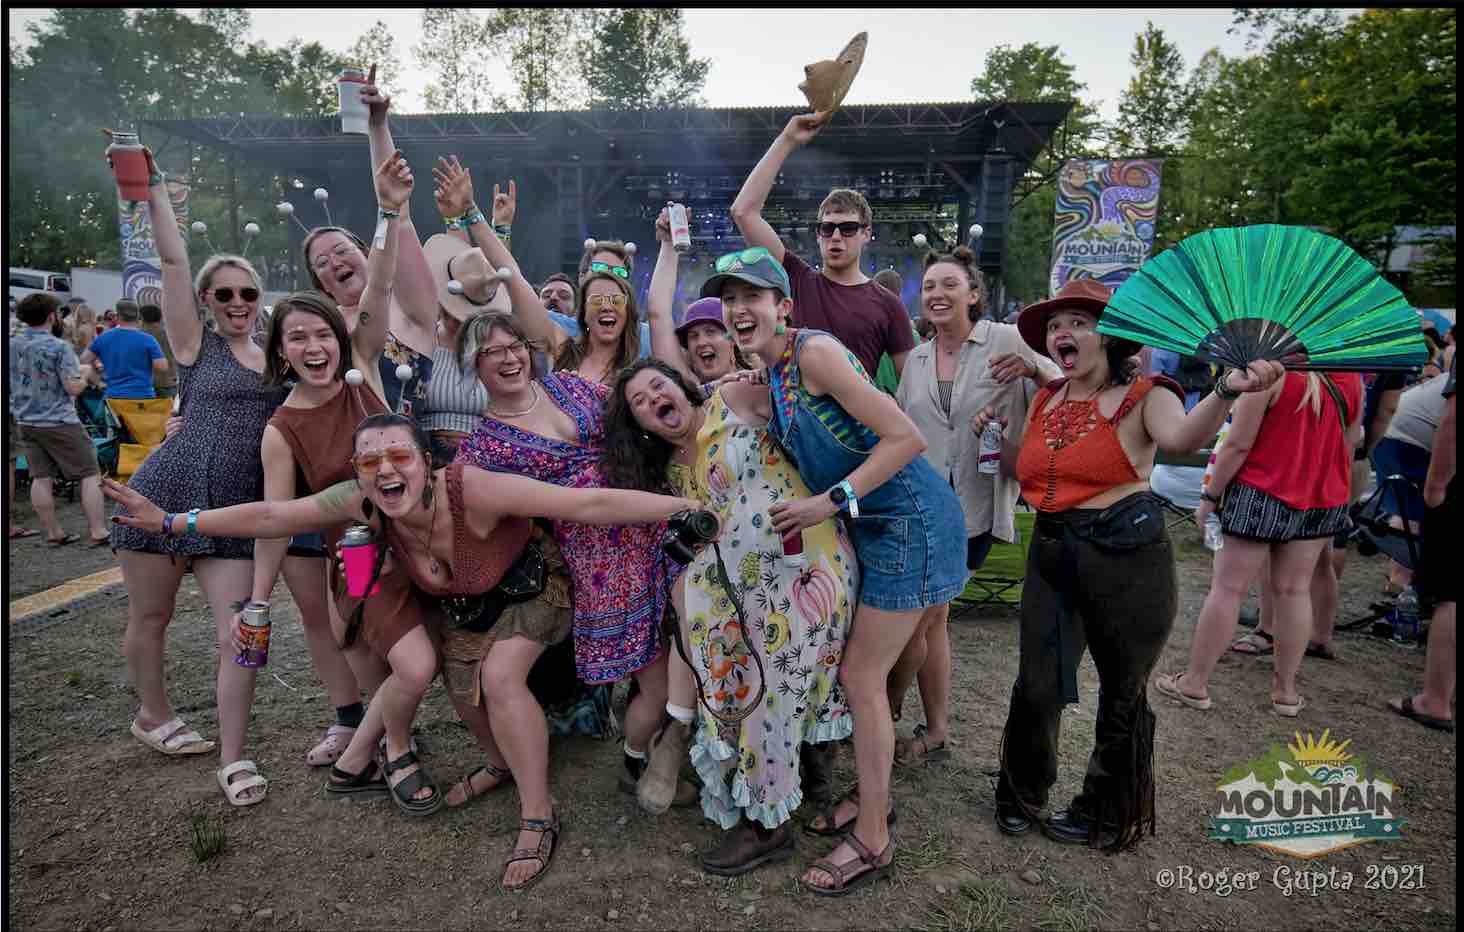 happy people in front of stage at mountain music festival 2021